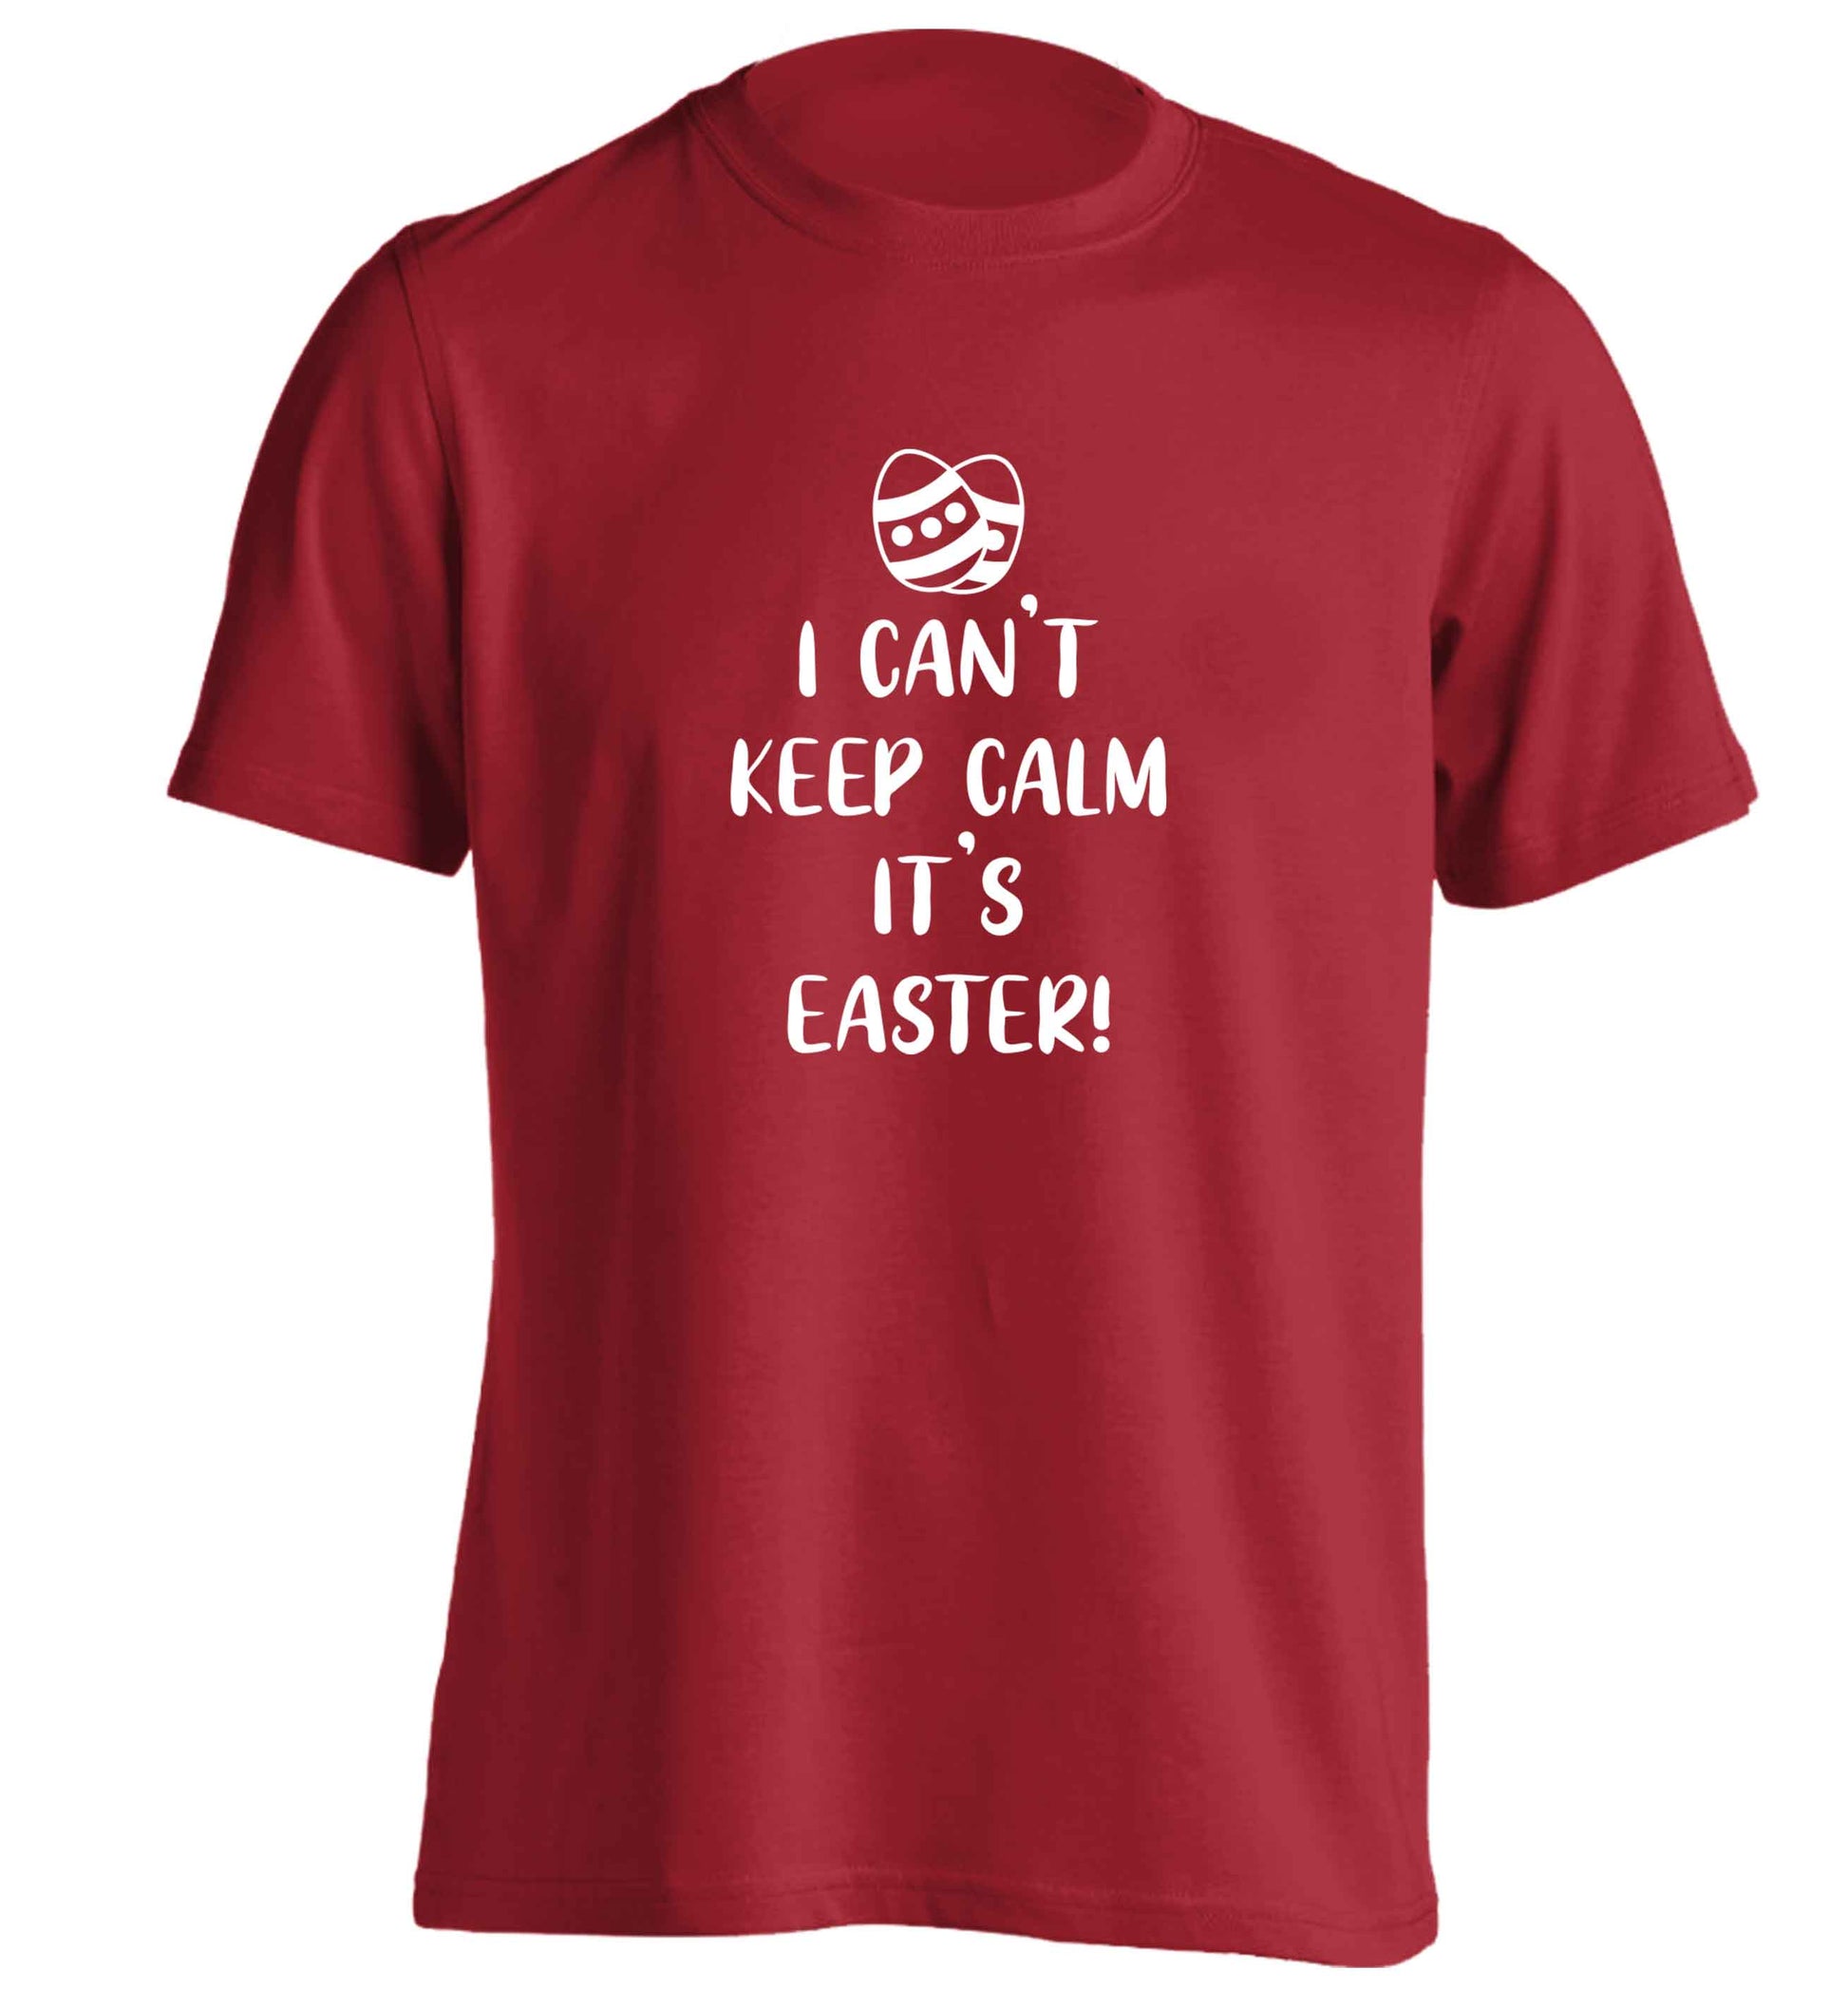 I can't keep calm it's Easter adults unisex red Tshirt 2XL